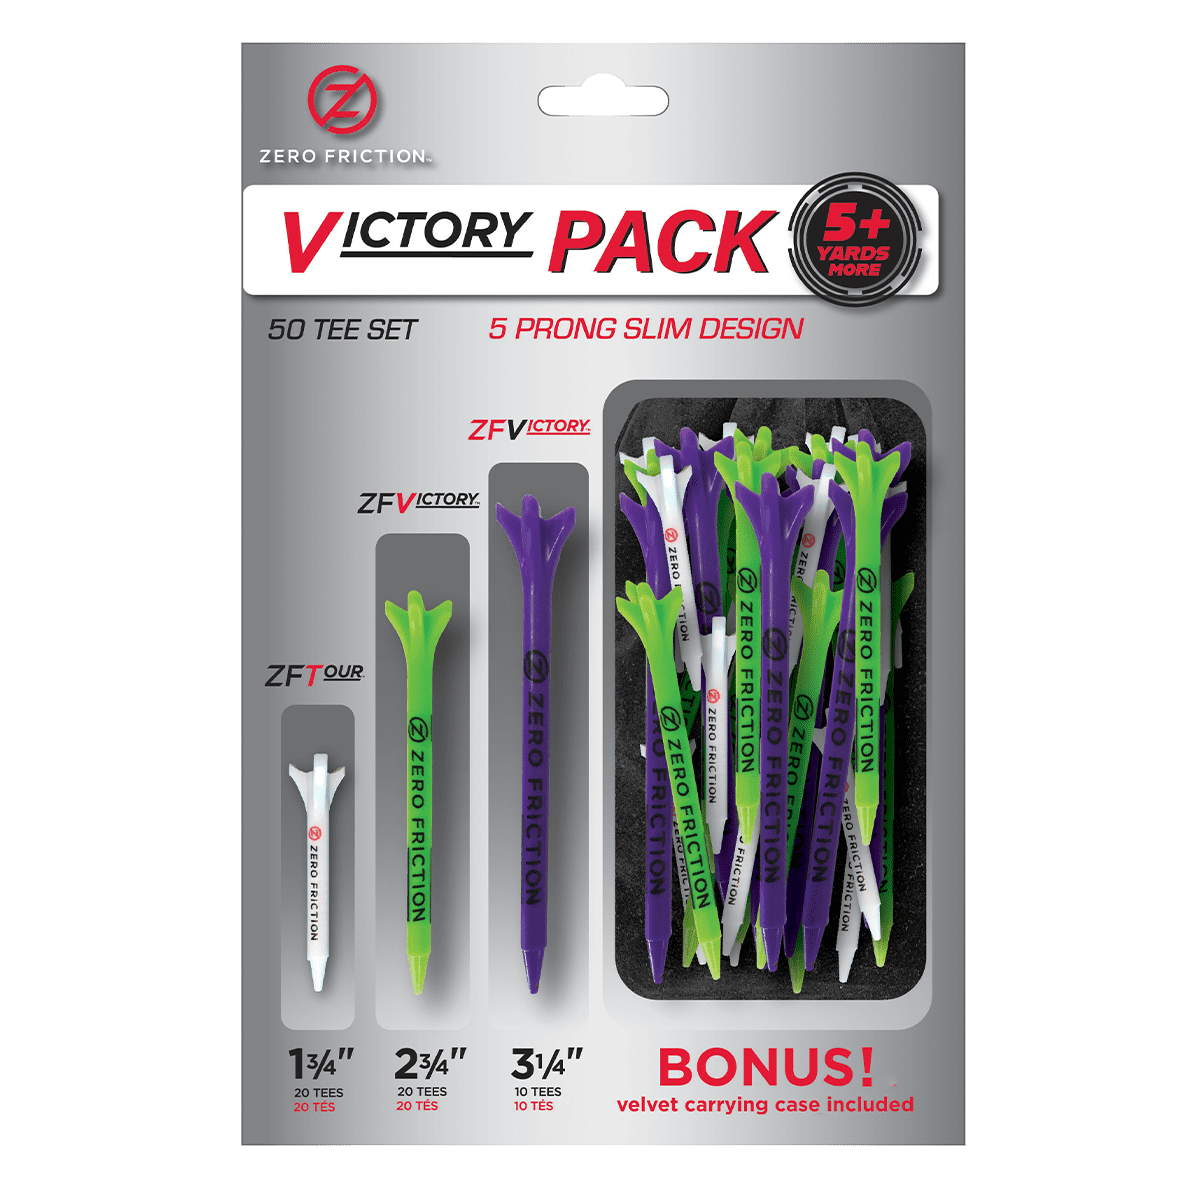 50-Pack Zero Friction Victory Plastic Golf Tees Set (Multicolor Variety Pack) $4.55, More  + Free S&H w/ Walmart+ or $35+